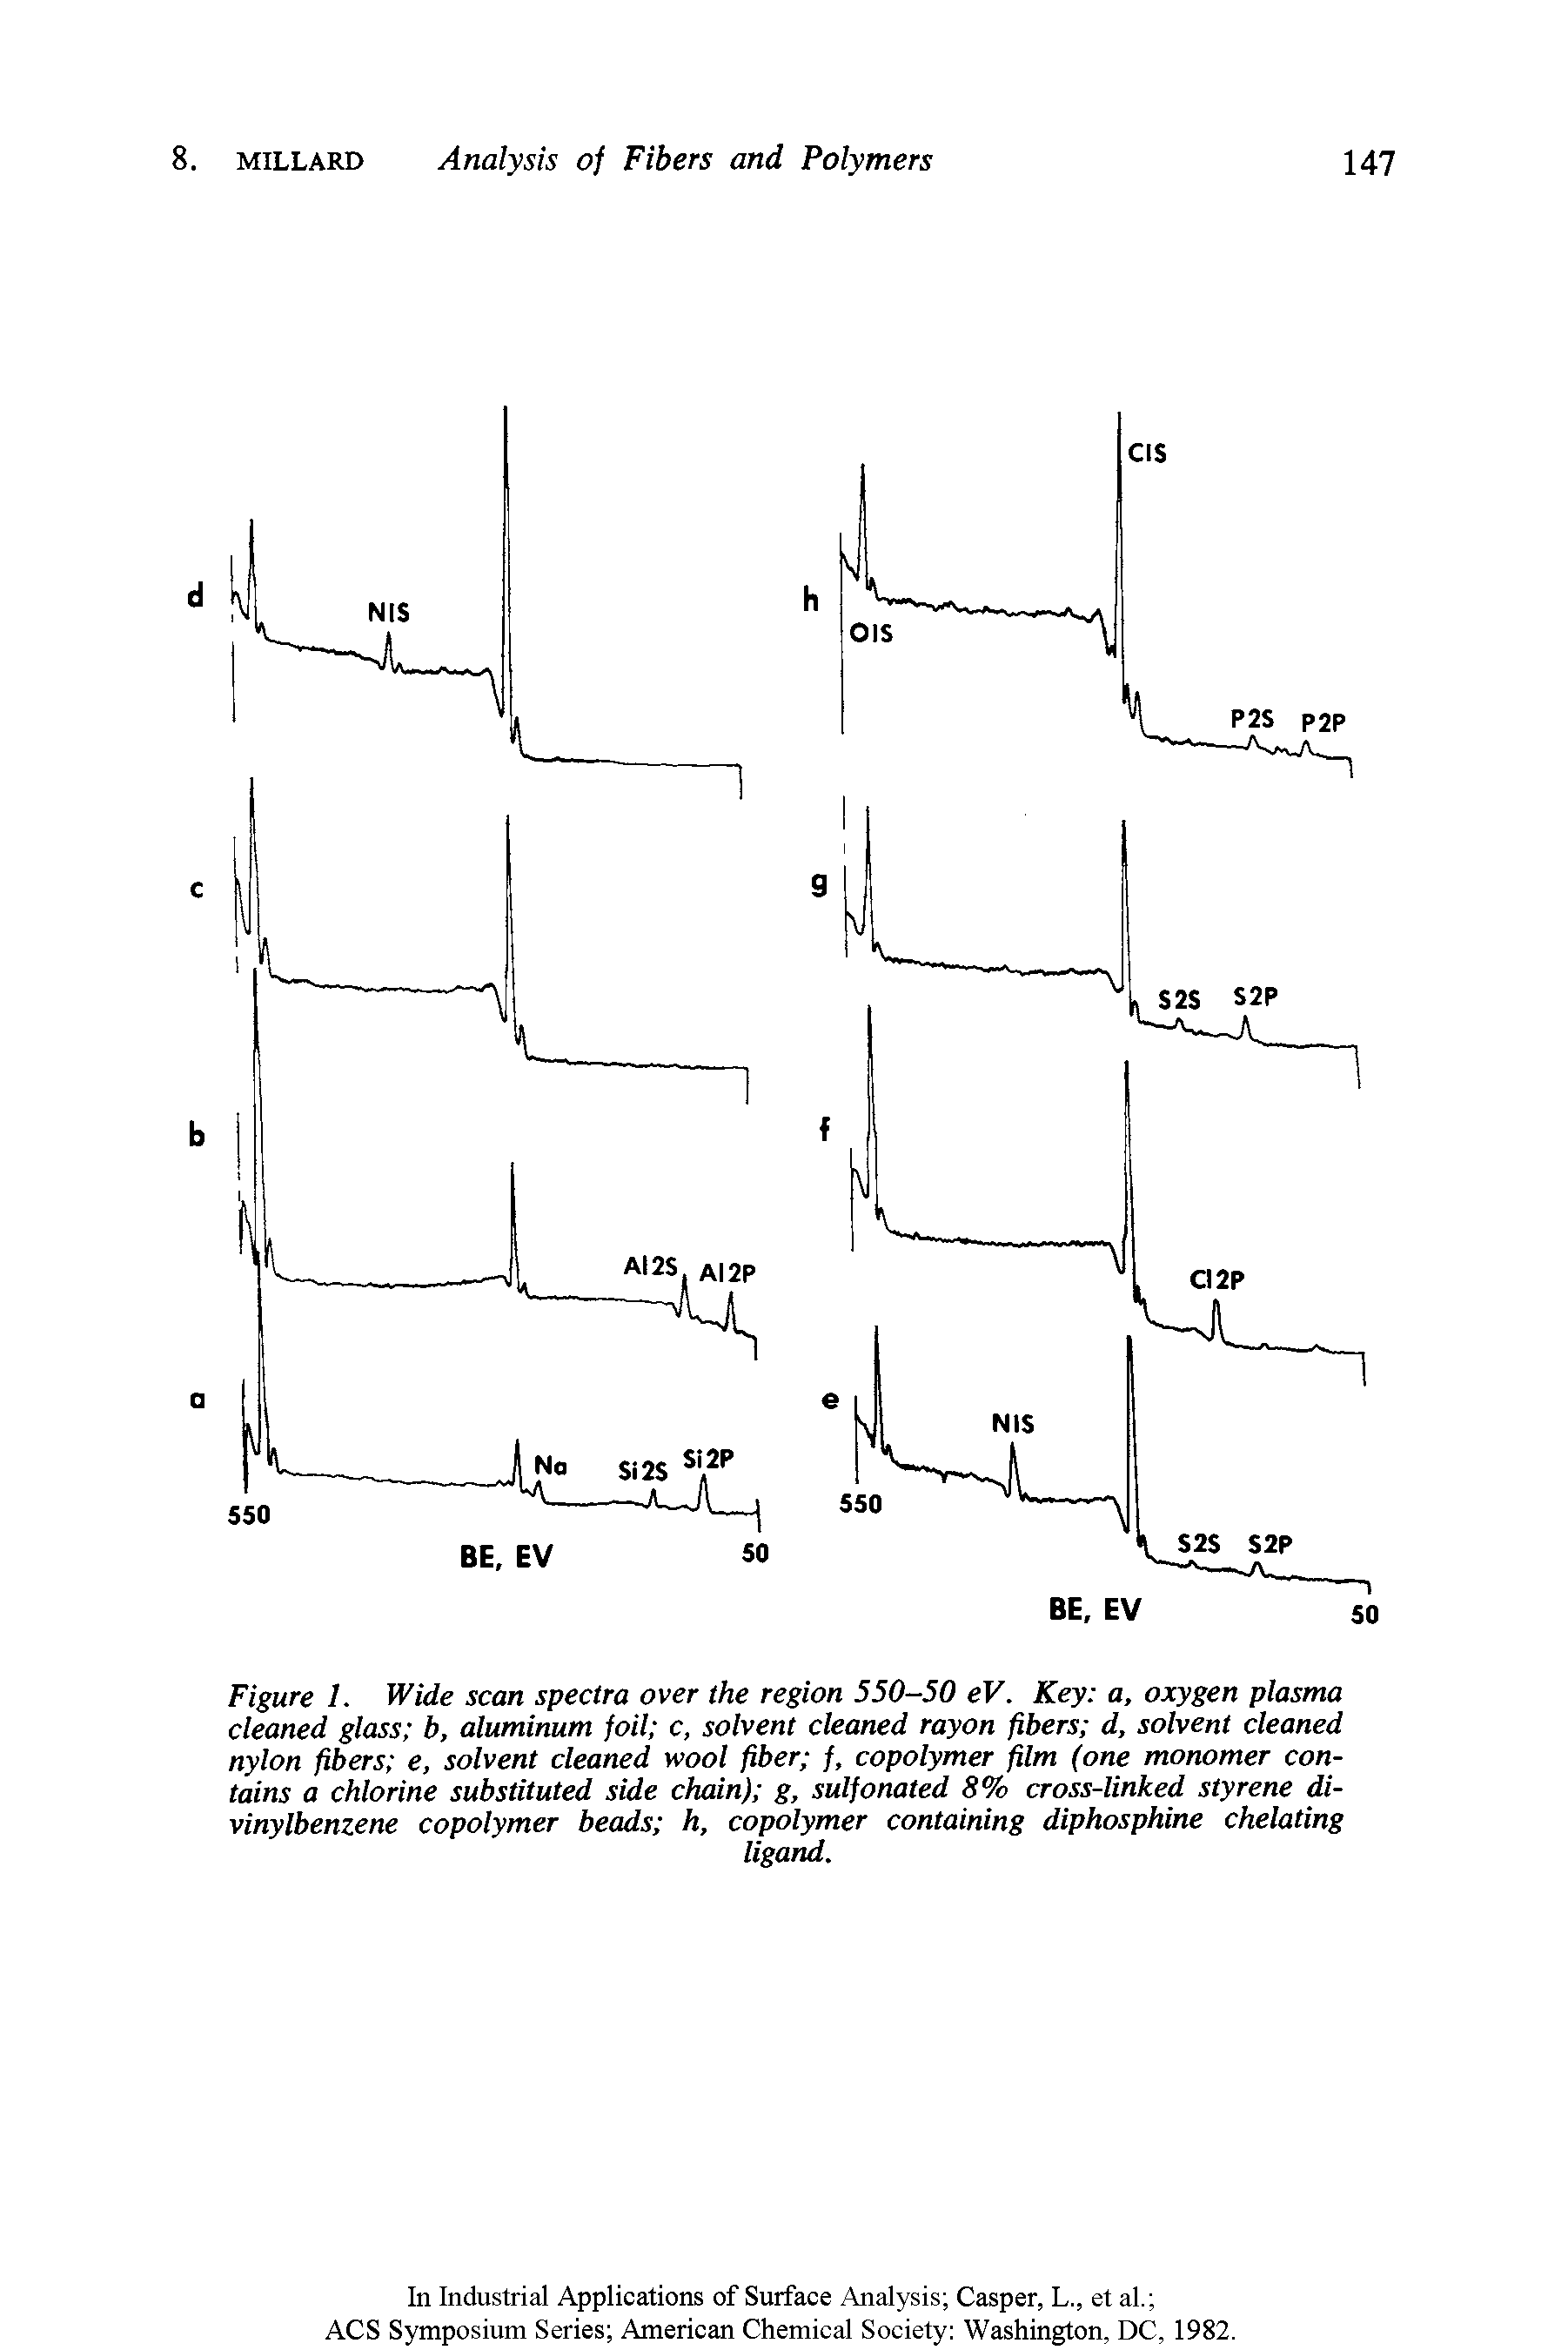 Figure 1. Wide scan spectra over the region 550-50 eV. Key a, oxygen plasma cleaned glass b, aluminum foil c, solvent cleaned rayon fibers d, solvent cleaned nylon fibers e, solvent cleaned wool fiber f, copolymer film (one monomer contains a chlorine substituted side chain) g, sulfonated 8% cross-linked styrene di-vinylbenzene copolymer beads h, copolymer containing diphosphine chelating...